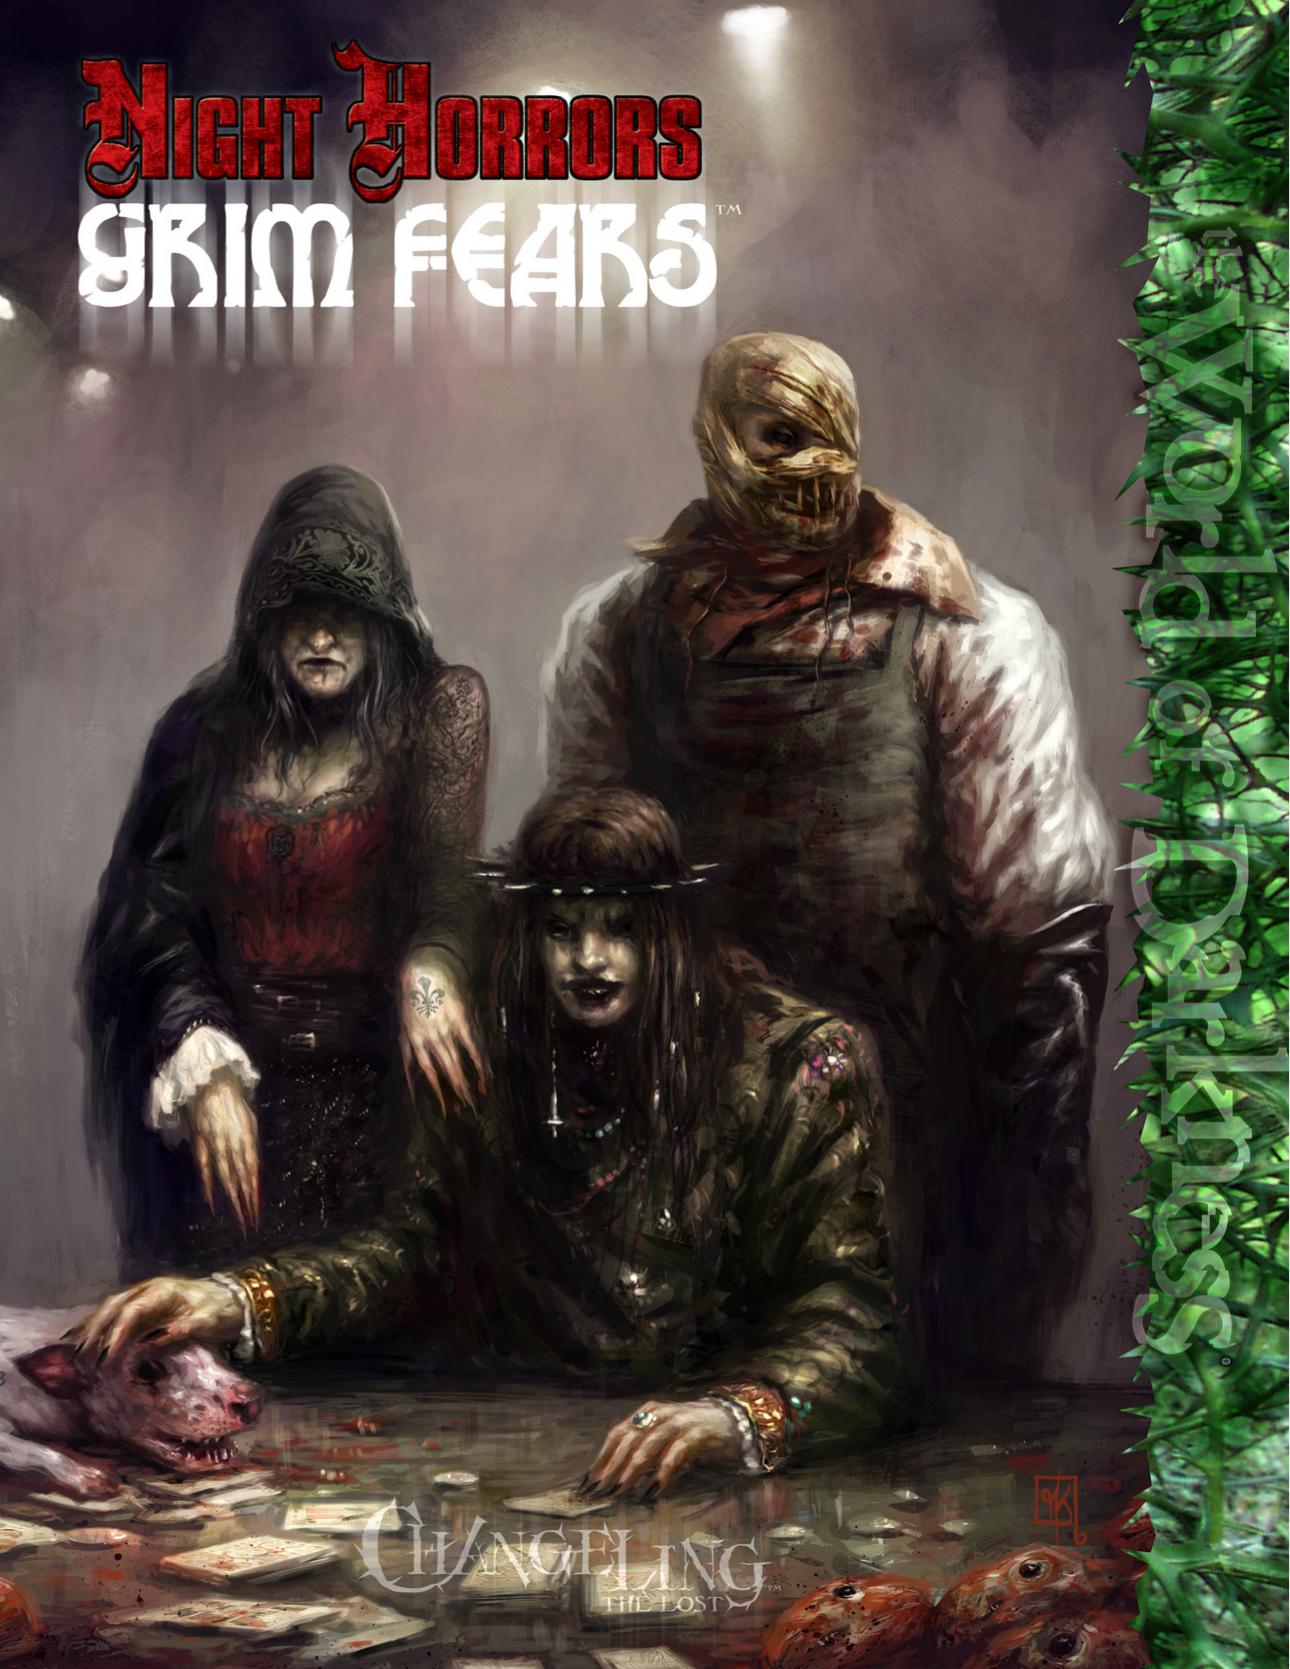 CtL Night Horrors Grim Fears